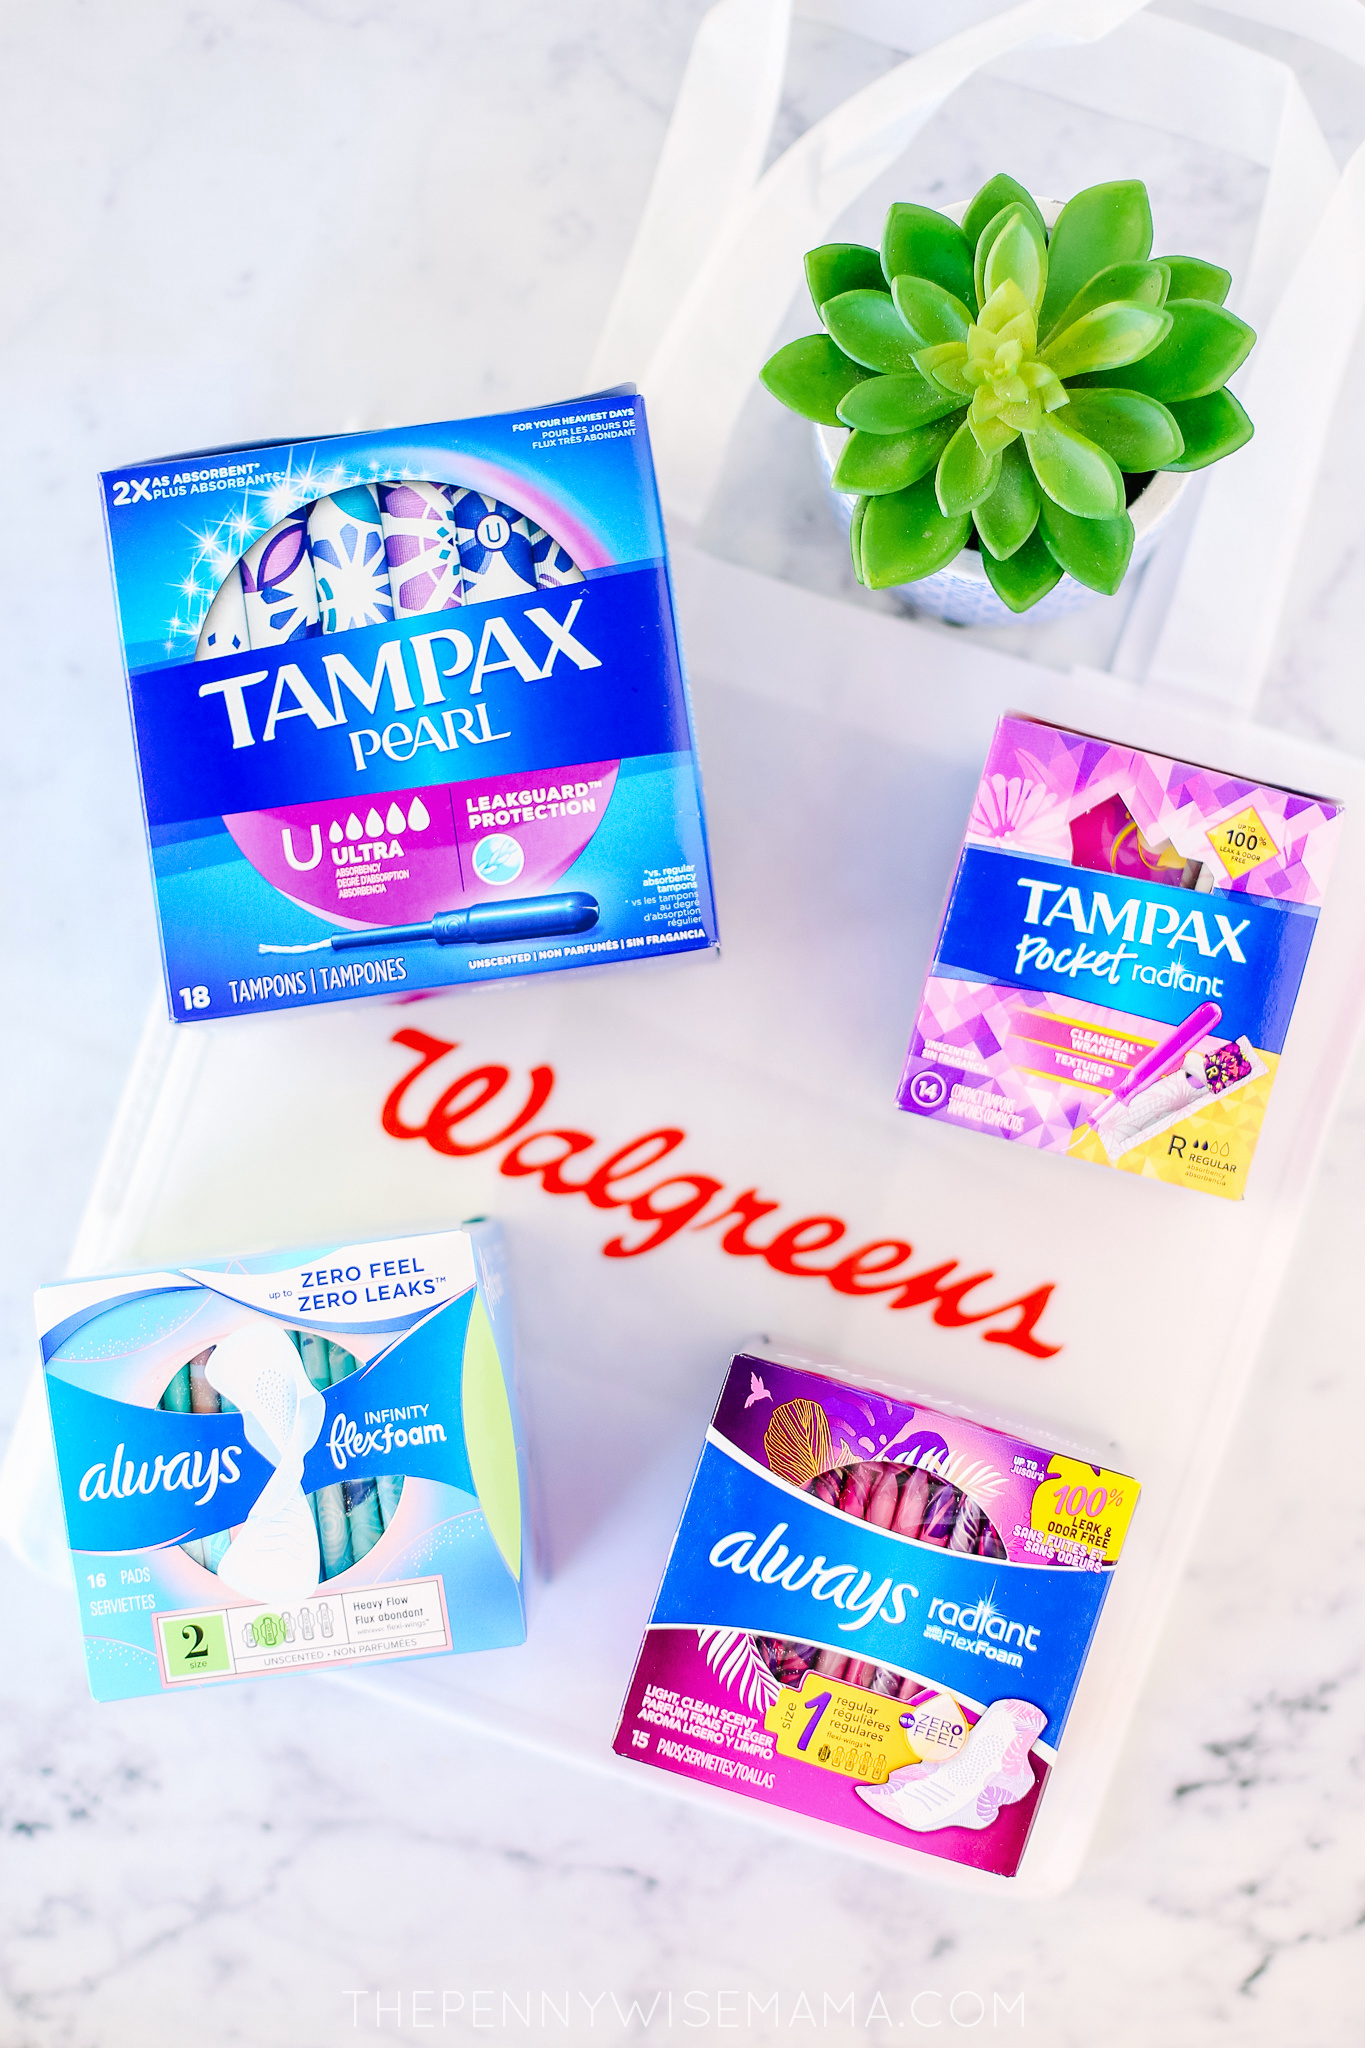 Save Big on Tampax & Always with 2/$5 Deal at Walgreens